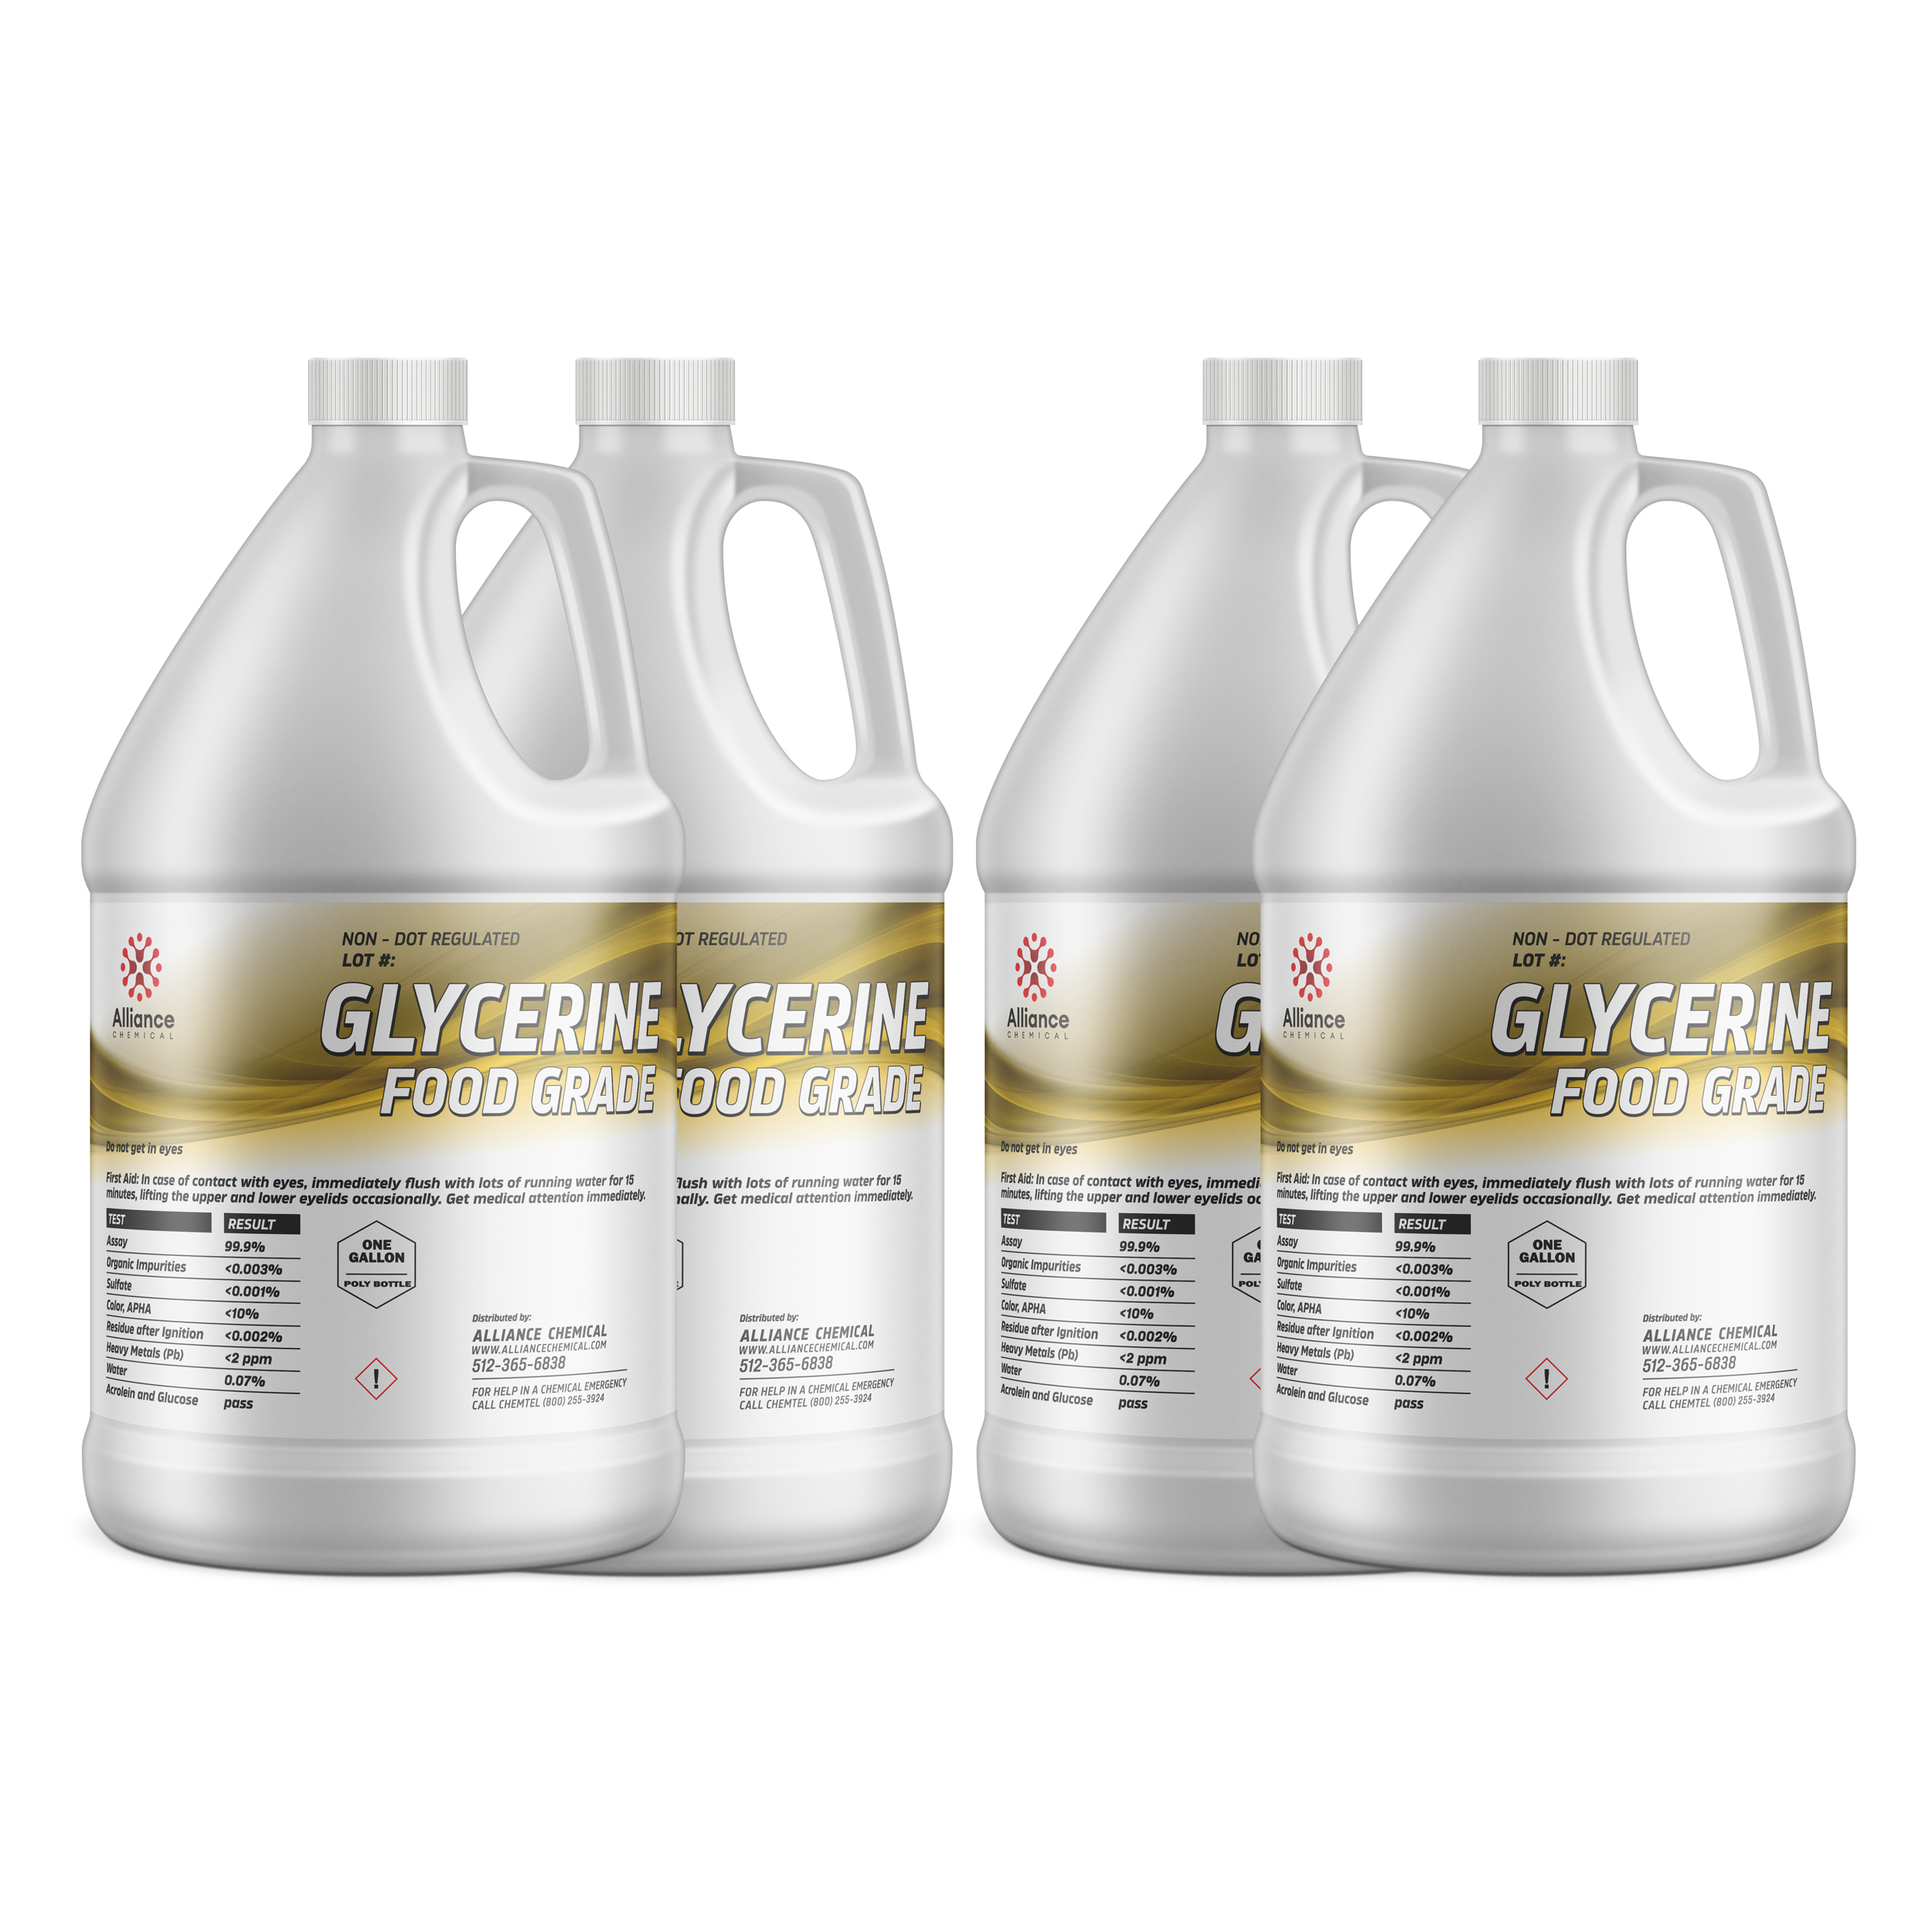 Vegetable Glycerine - USP Food Grade - 15 Gallon Carboy - Uses: Cosmetics, Pharmaceutical and Food Products - Made in America